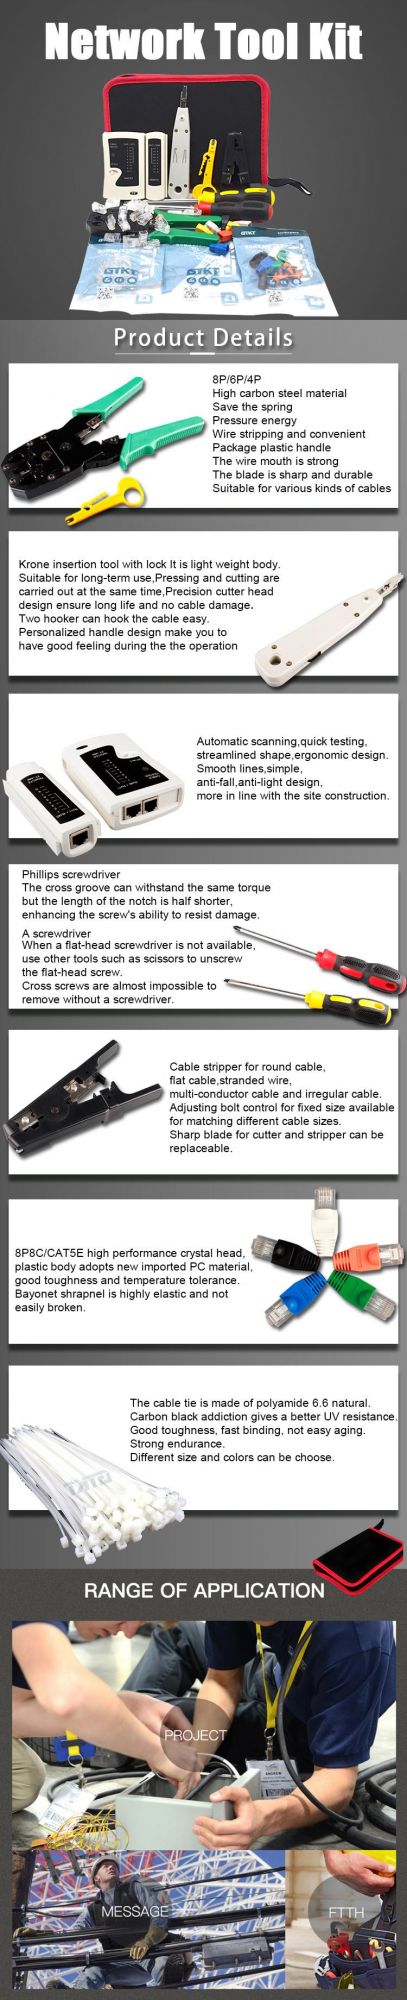 Gcabling Computer Wire Tracker Krone Insertion Tool Hand Crimping RJ45 Connector Professional Network Tool Kit